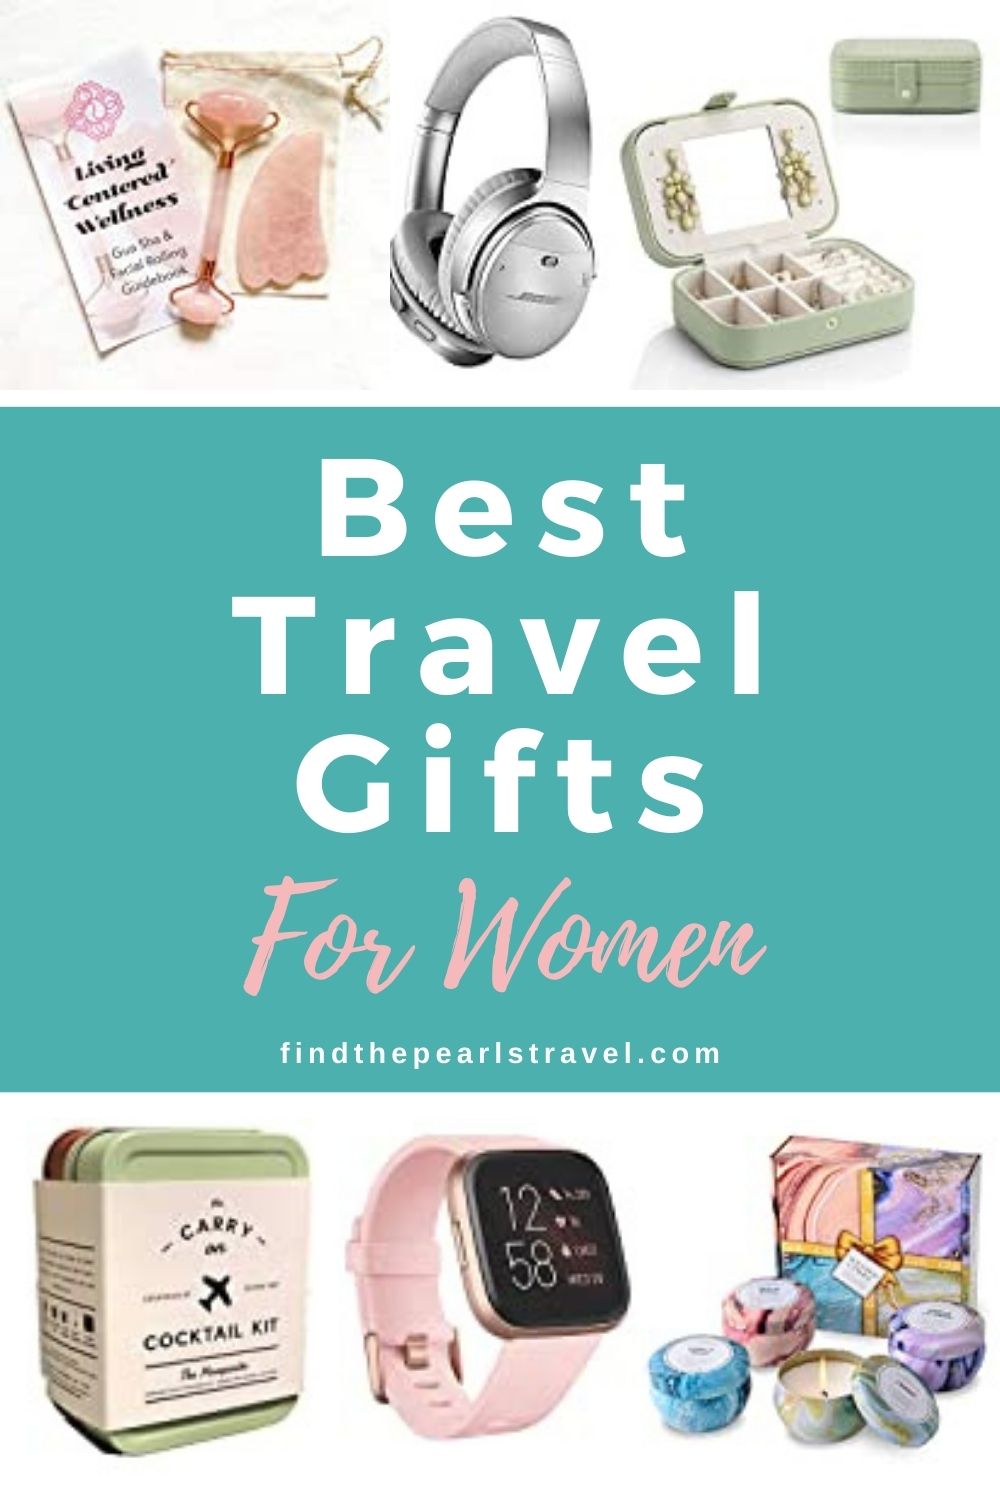 Best Travel Gifts for Women (That She Will Love!) 2020 Gift Guide